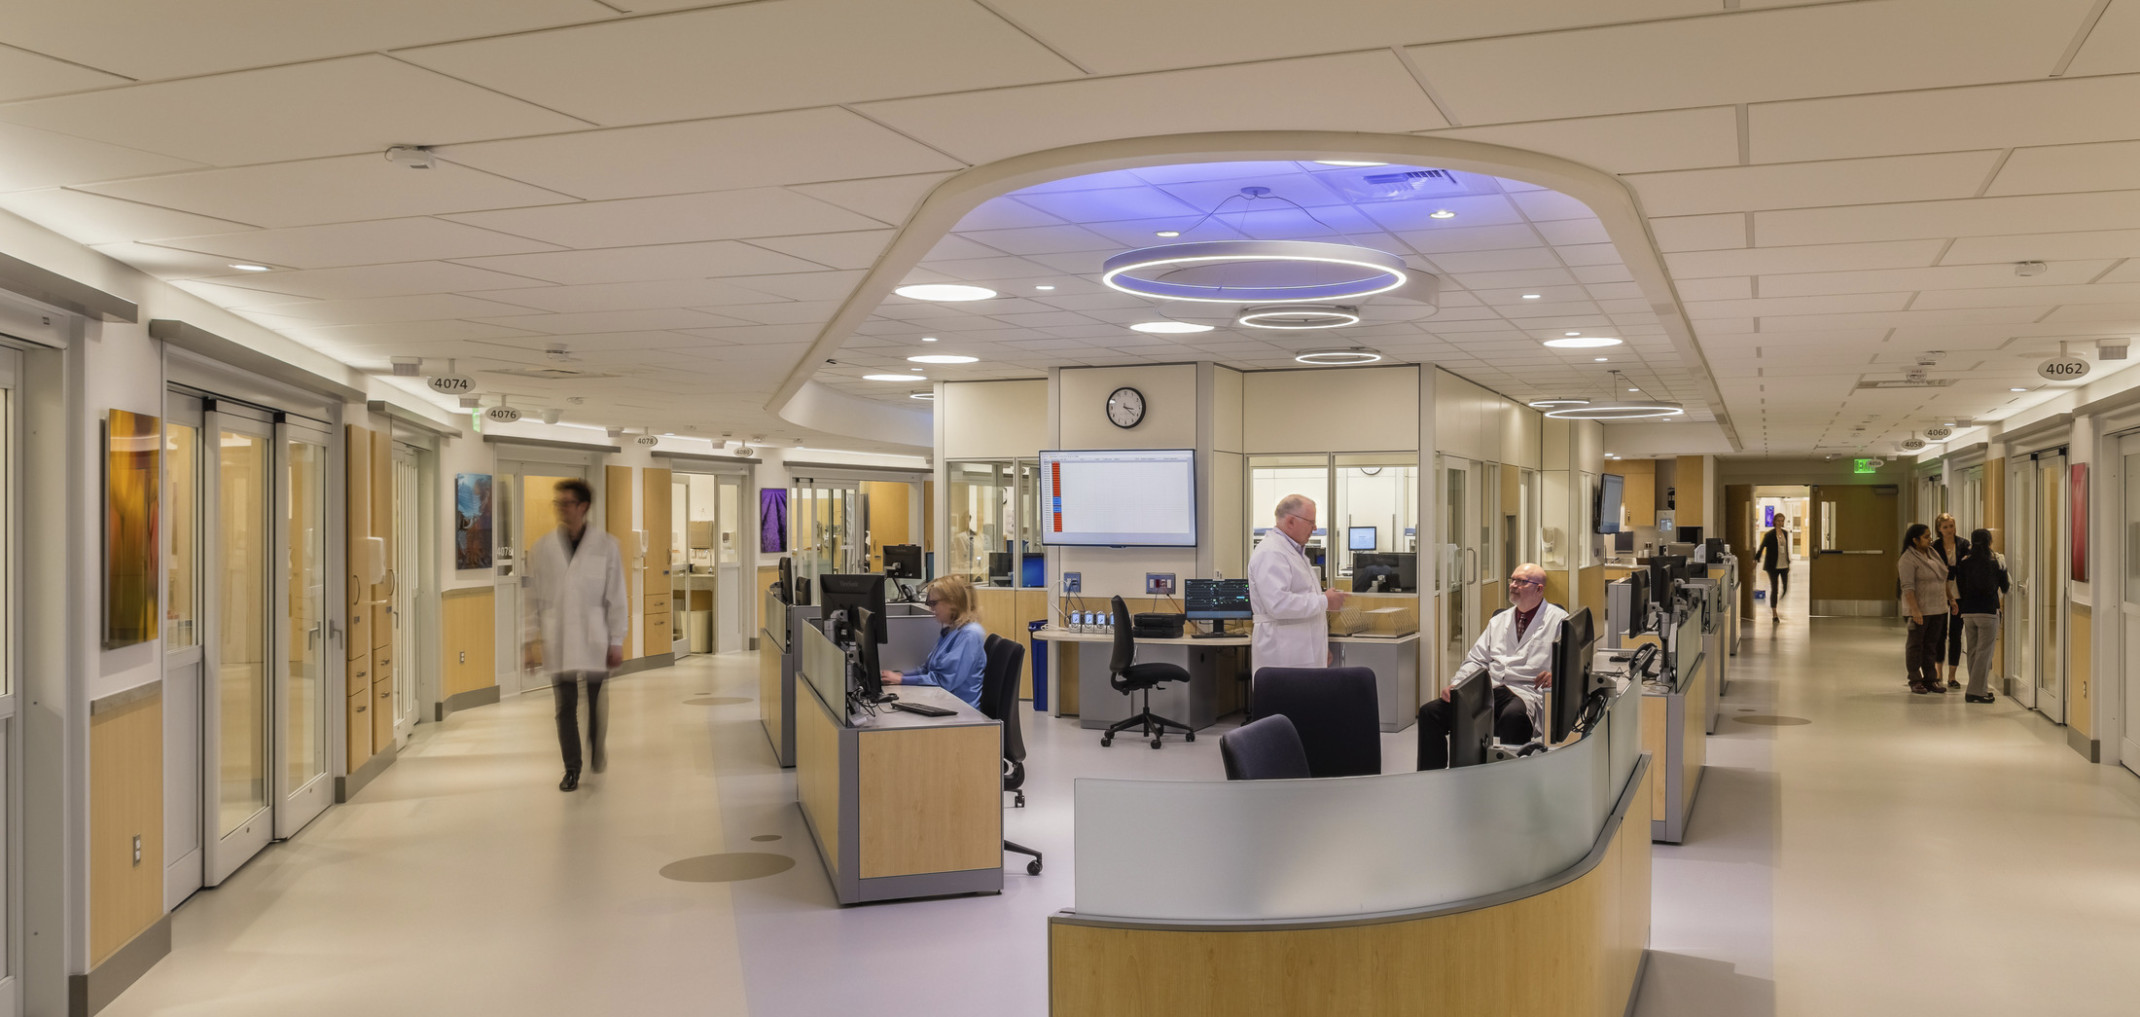 EvergreenHealth Progressive Care Unit with long desk wrapped around corner of hallway with blue and white accent lights above